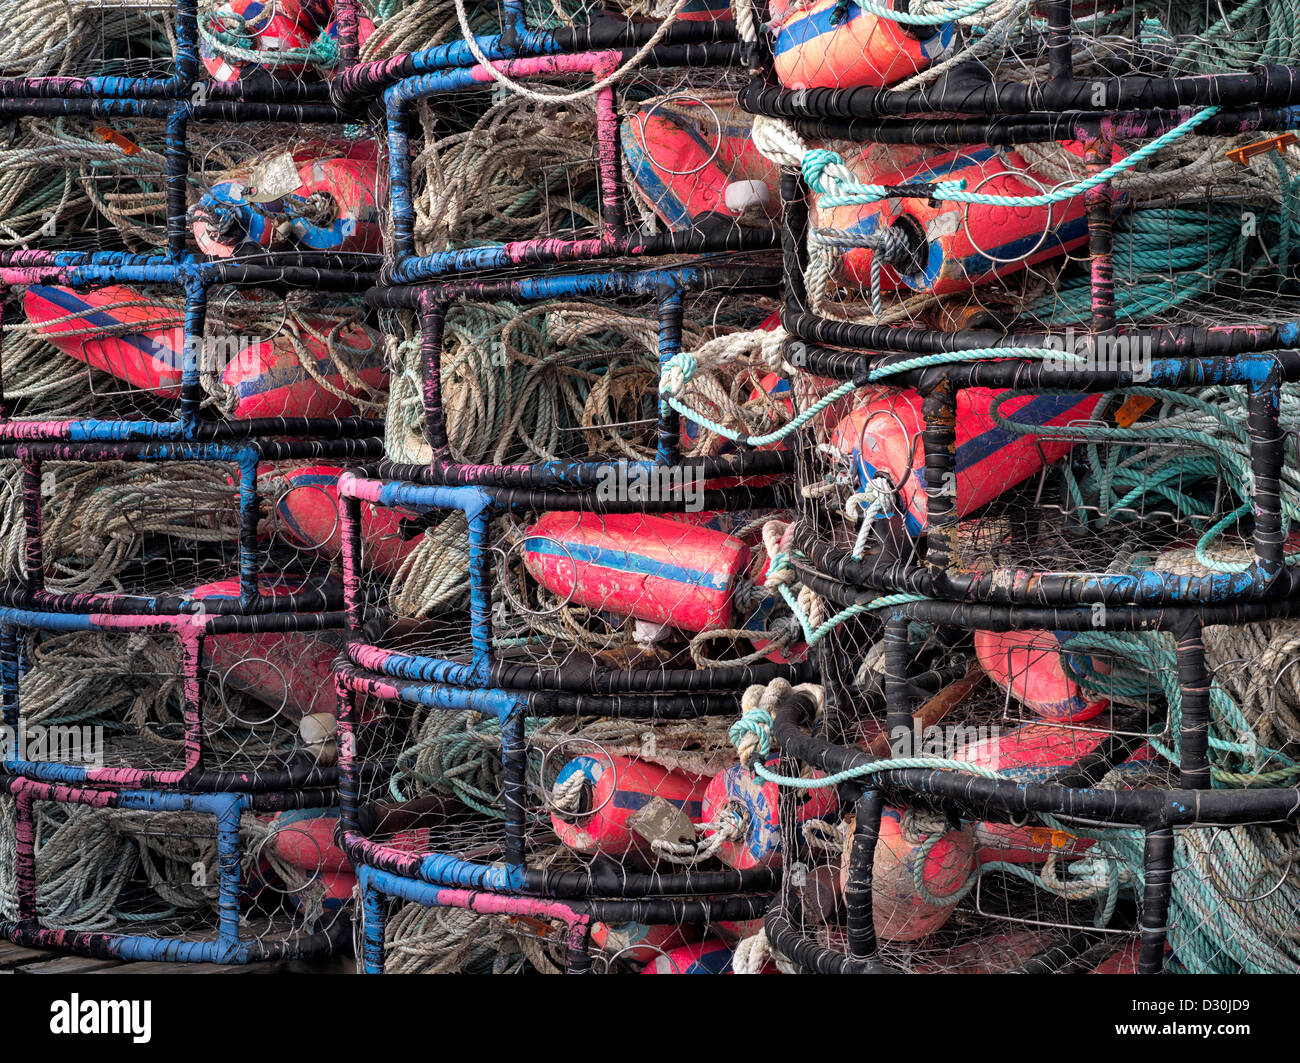 Colorful floats in crab pots stacked at Newport Haebor. Oregon Stock Photo